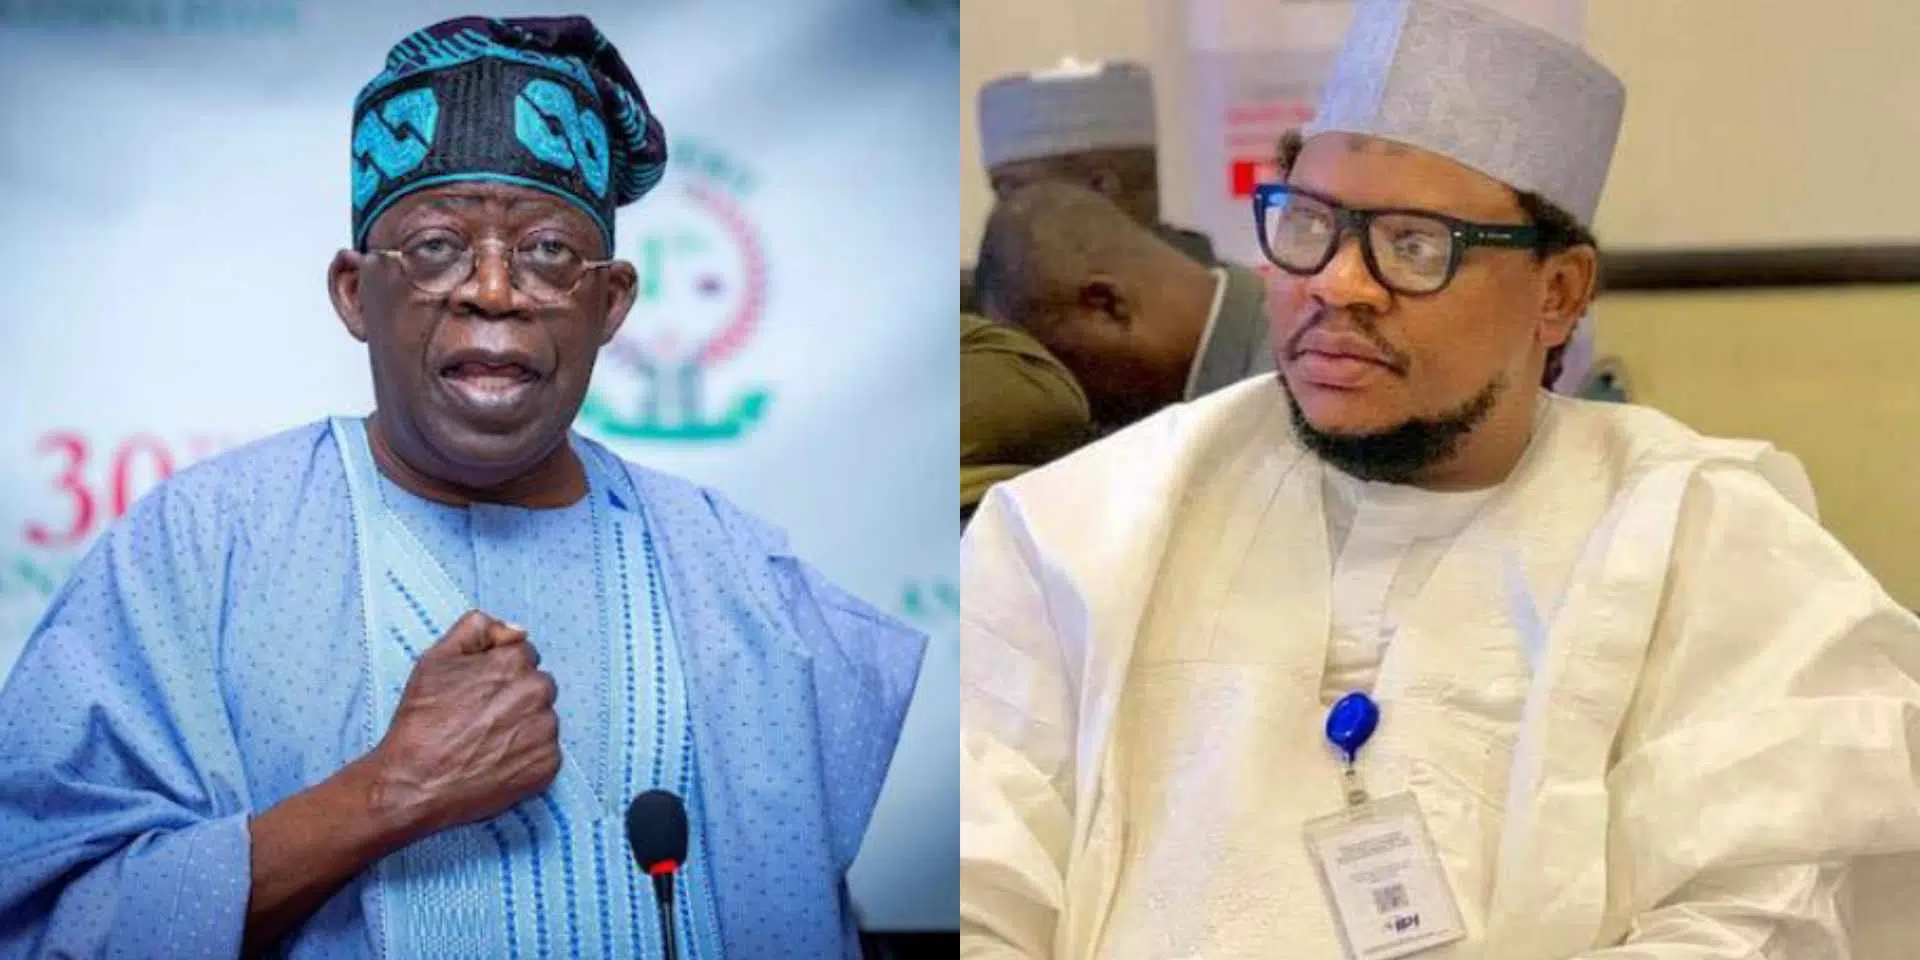 "Tinubu has been betrayed but not by Buhari" - Adamu Garba submits; points fingers of blame